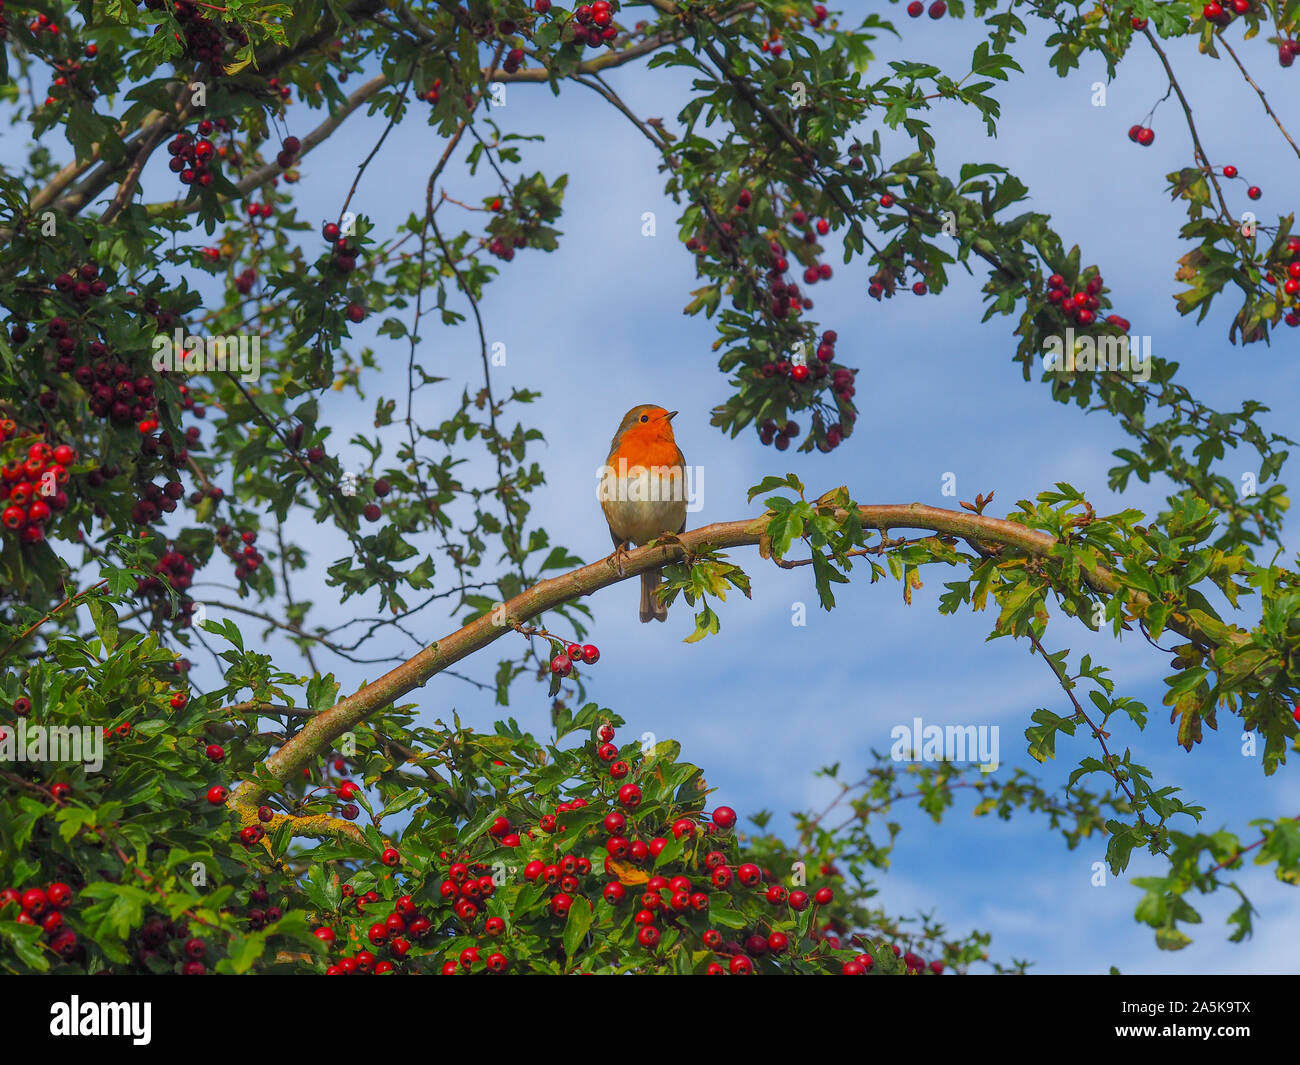 European robin (Erithacus rubecula) perched on a branch in a hawthorn tree with red berries Stock Photo